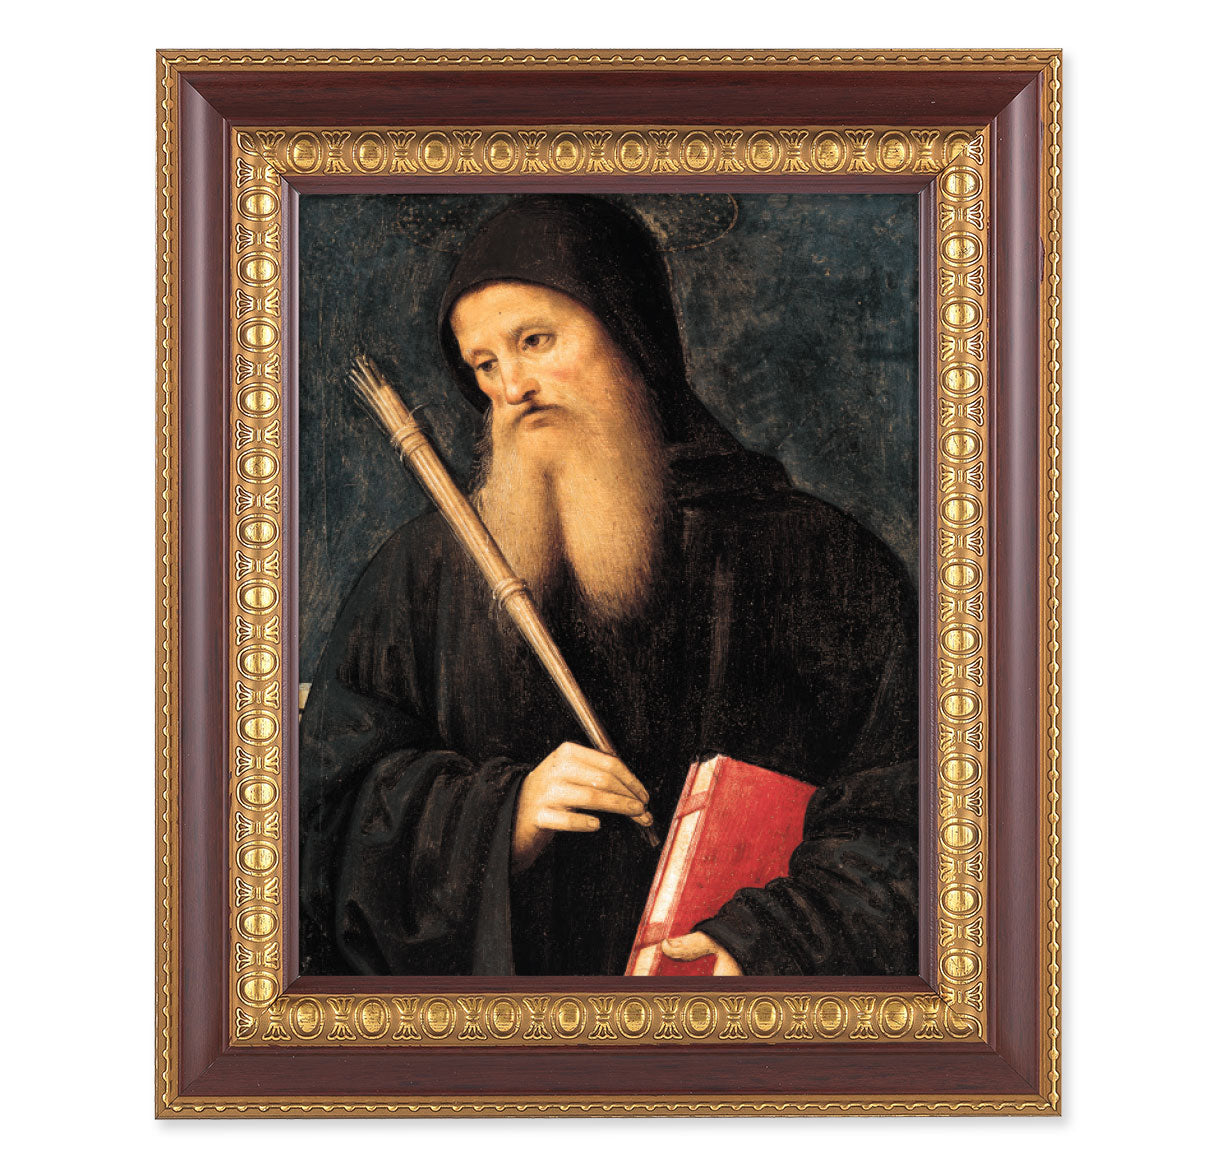 St. Benedict Picture Framed Wall Art Decor Large, Dark Cherry with Gold Egg and Dart Detailed Frame